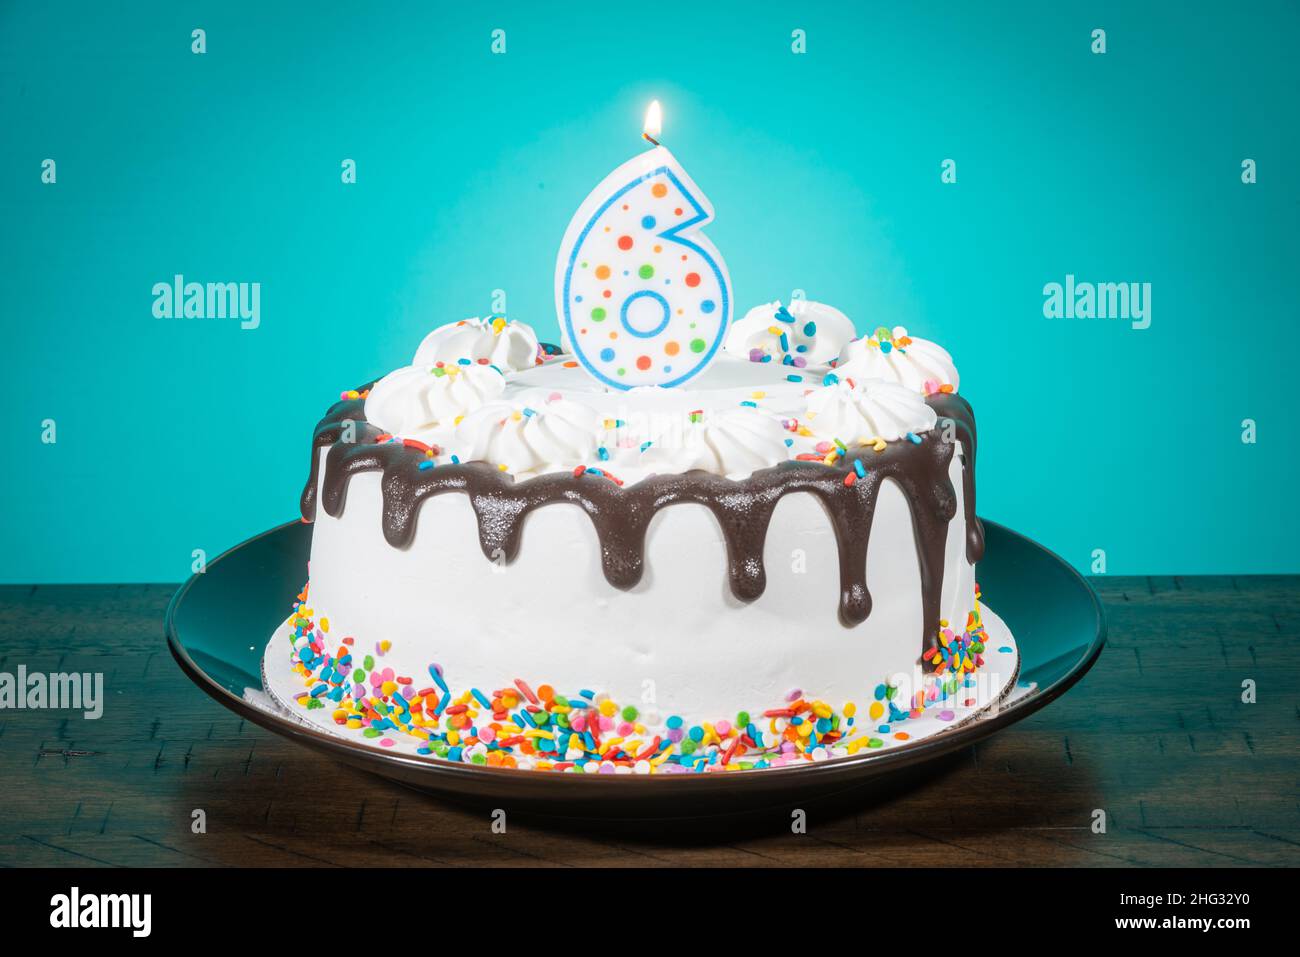 A birthday cake bears a candle in the shape of the number 6. Stock Photo